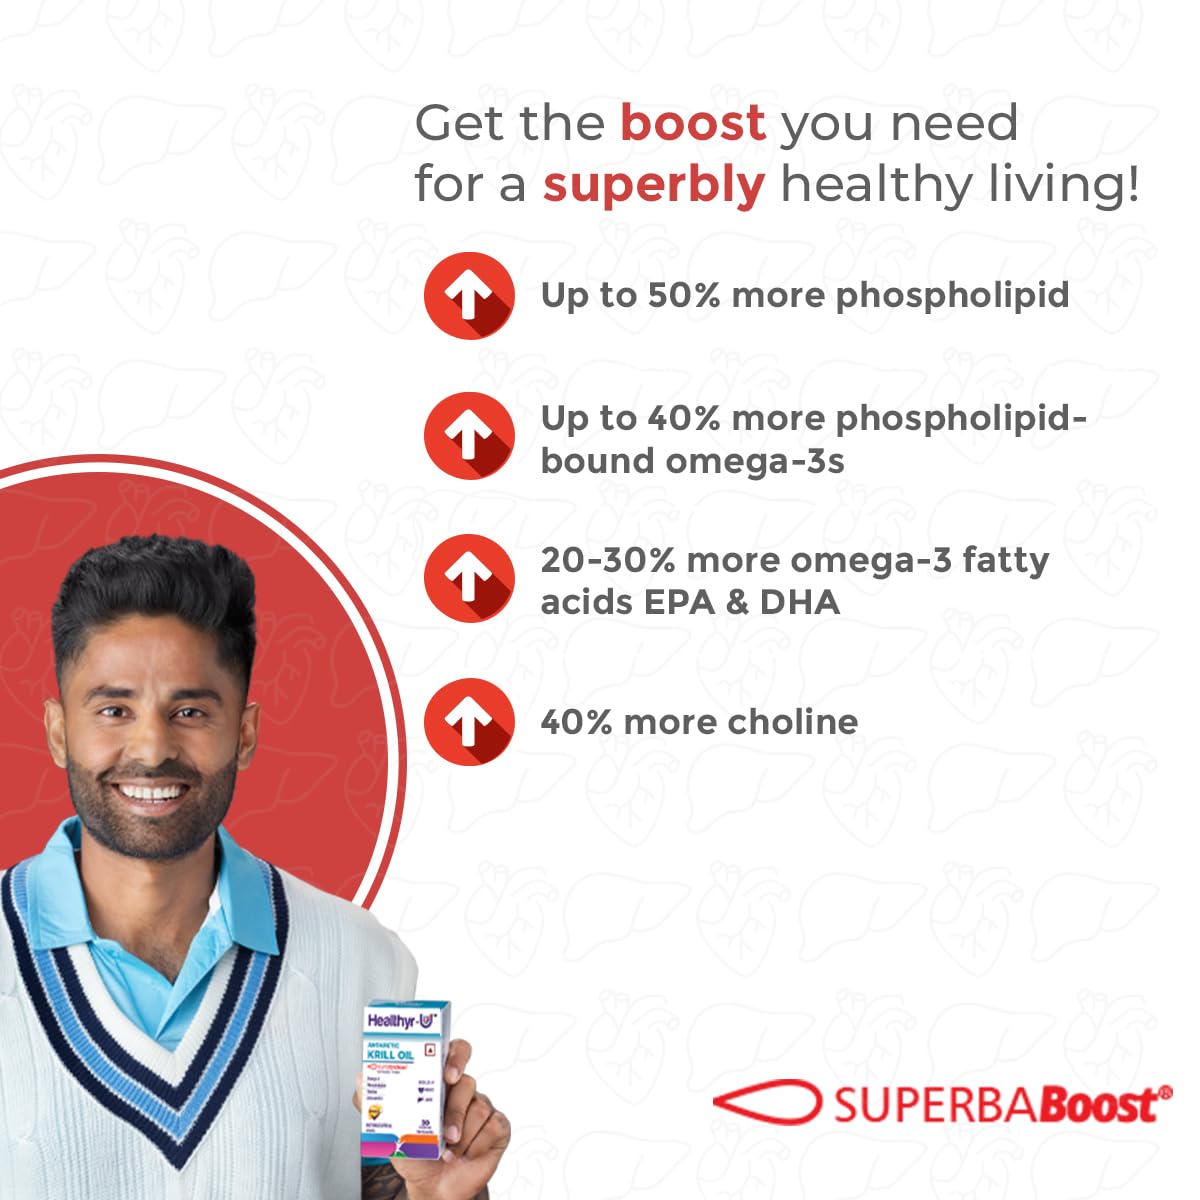 Healthyr-U SuperbaBoost Krill Oil Capsules infographic